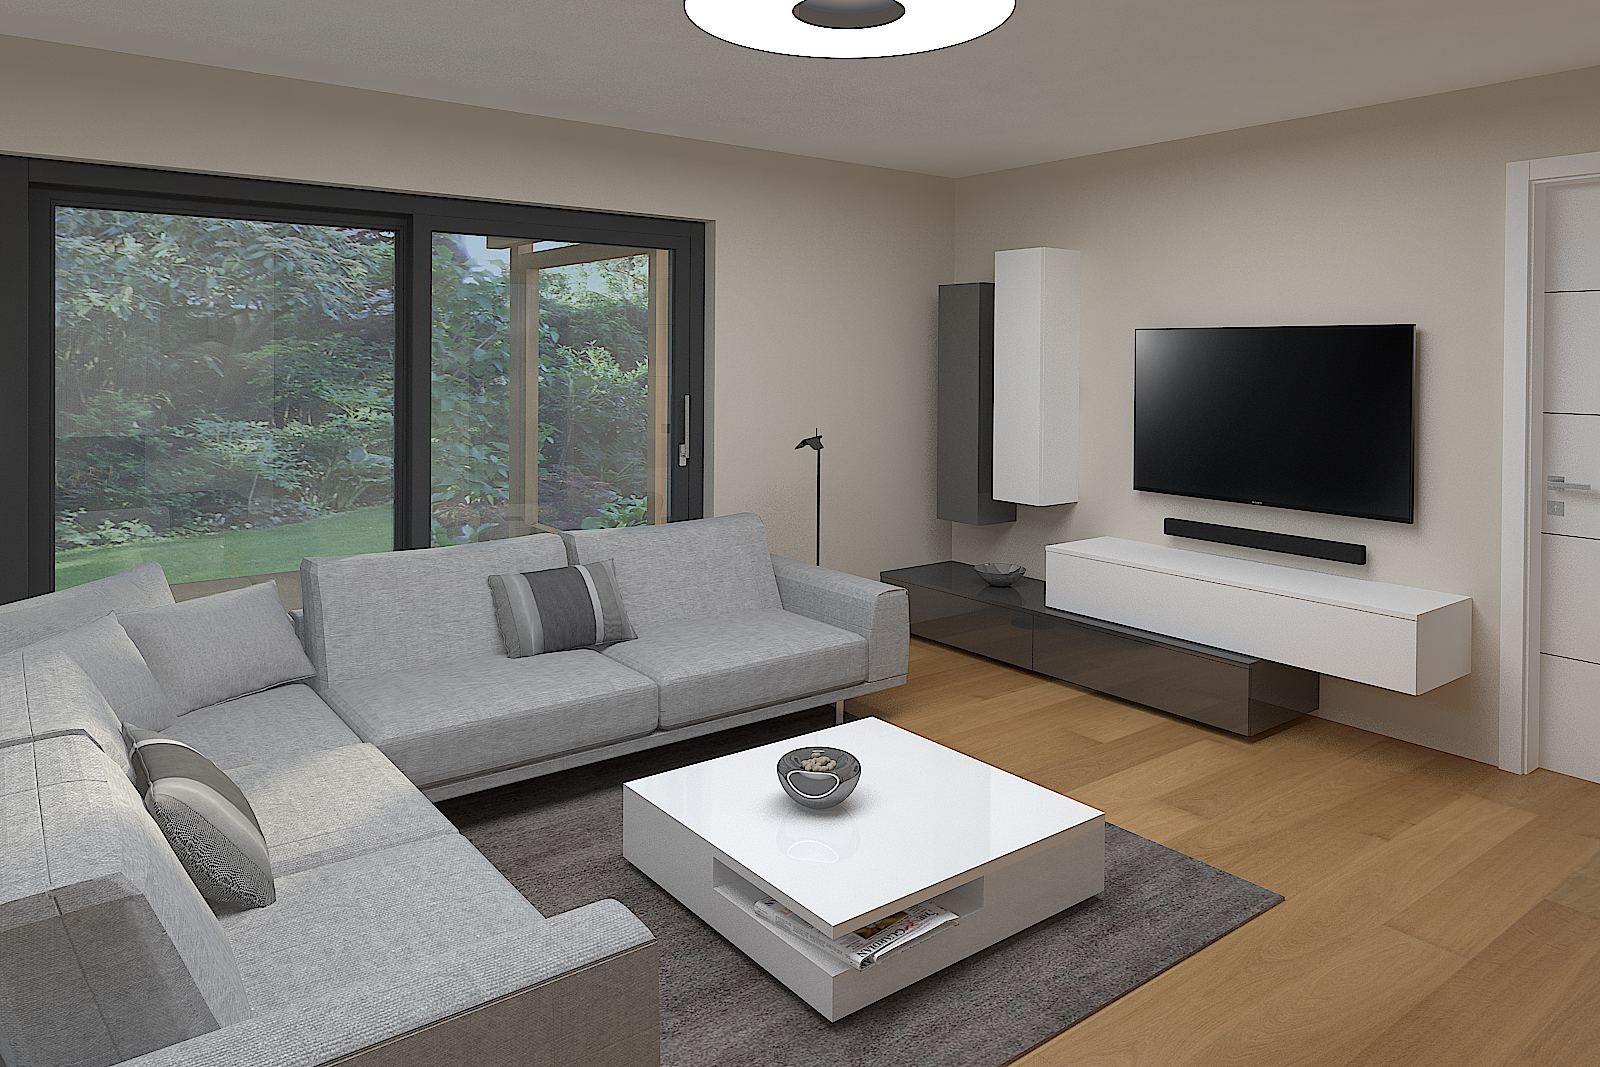 Living area view featuring a multi-level TV cupboard and a coffee table with an interesting decorative piece on top